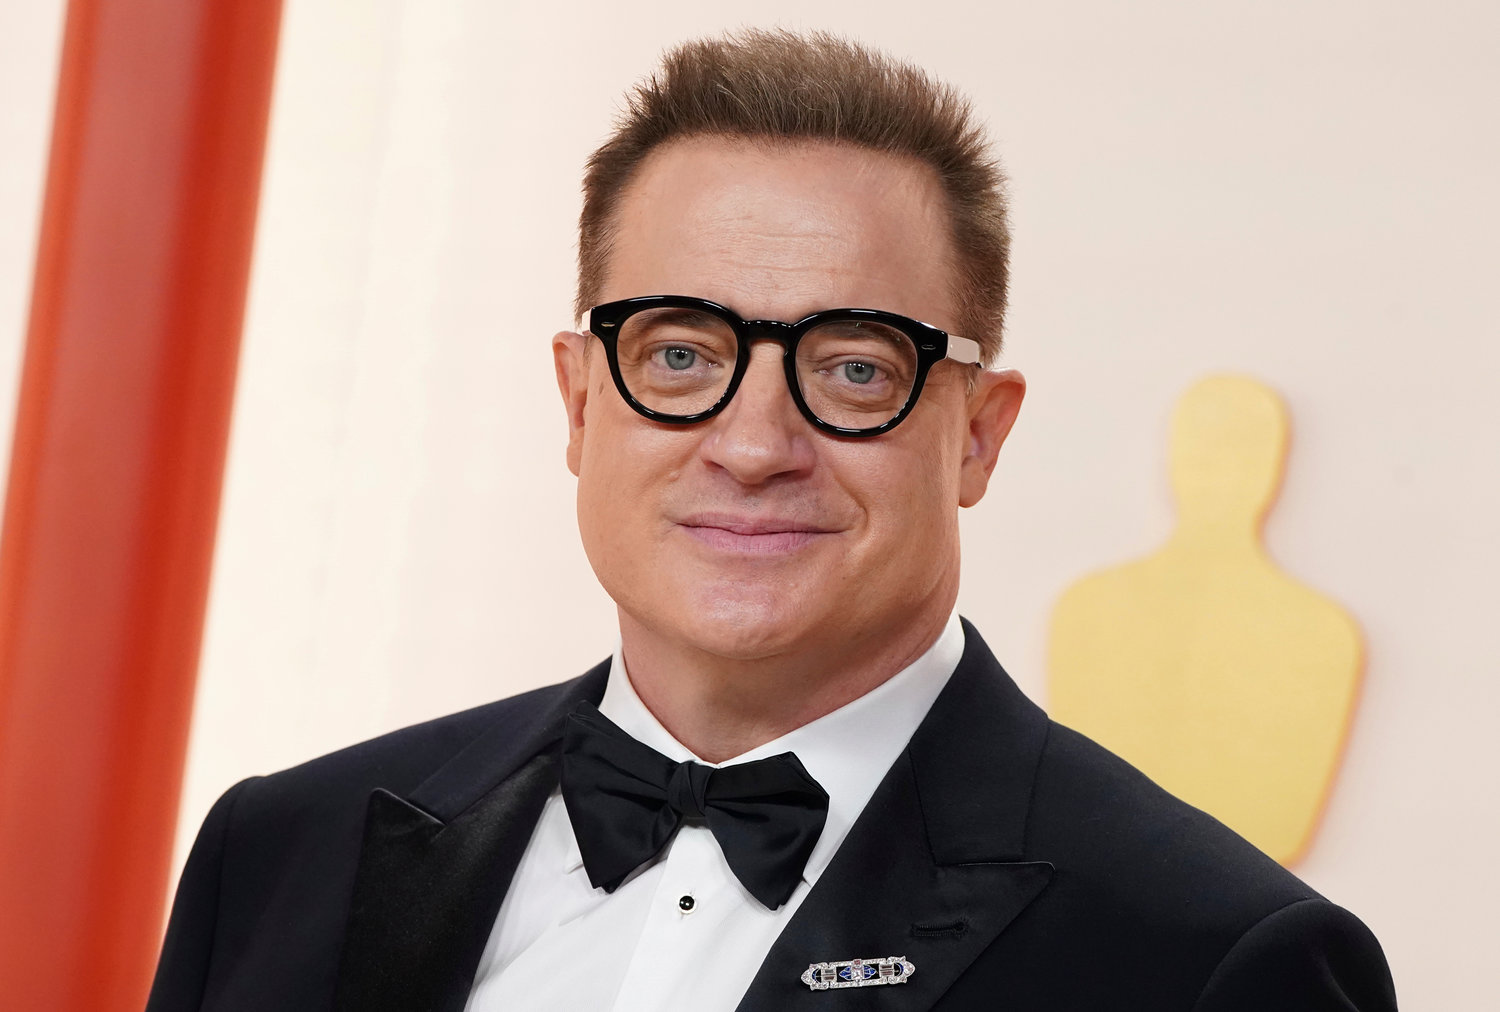 Brendan Fraser arrives at the Oscars on Sunday, March 12, 2023, at the Dolby Theatre in Los Angeles. (Photo by Jordan Strauss/Invision/AP)